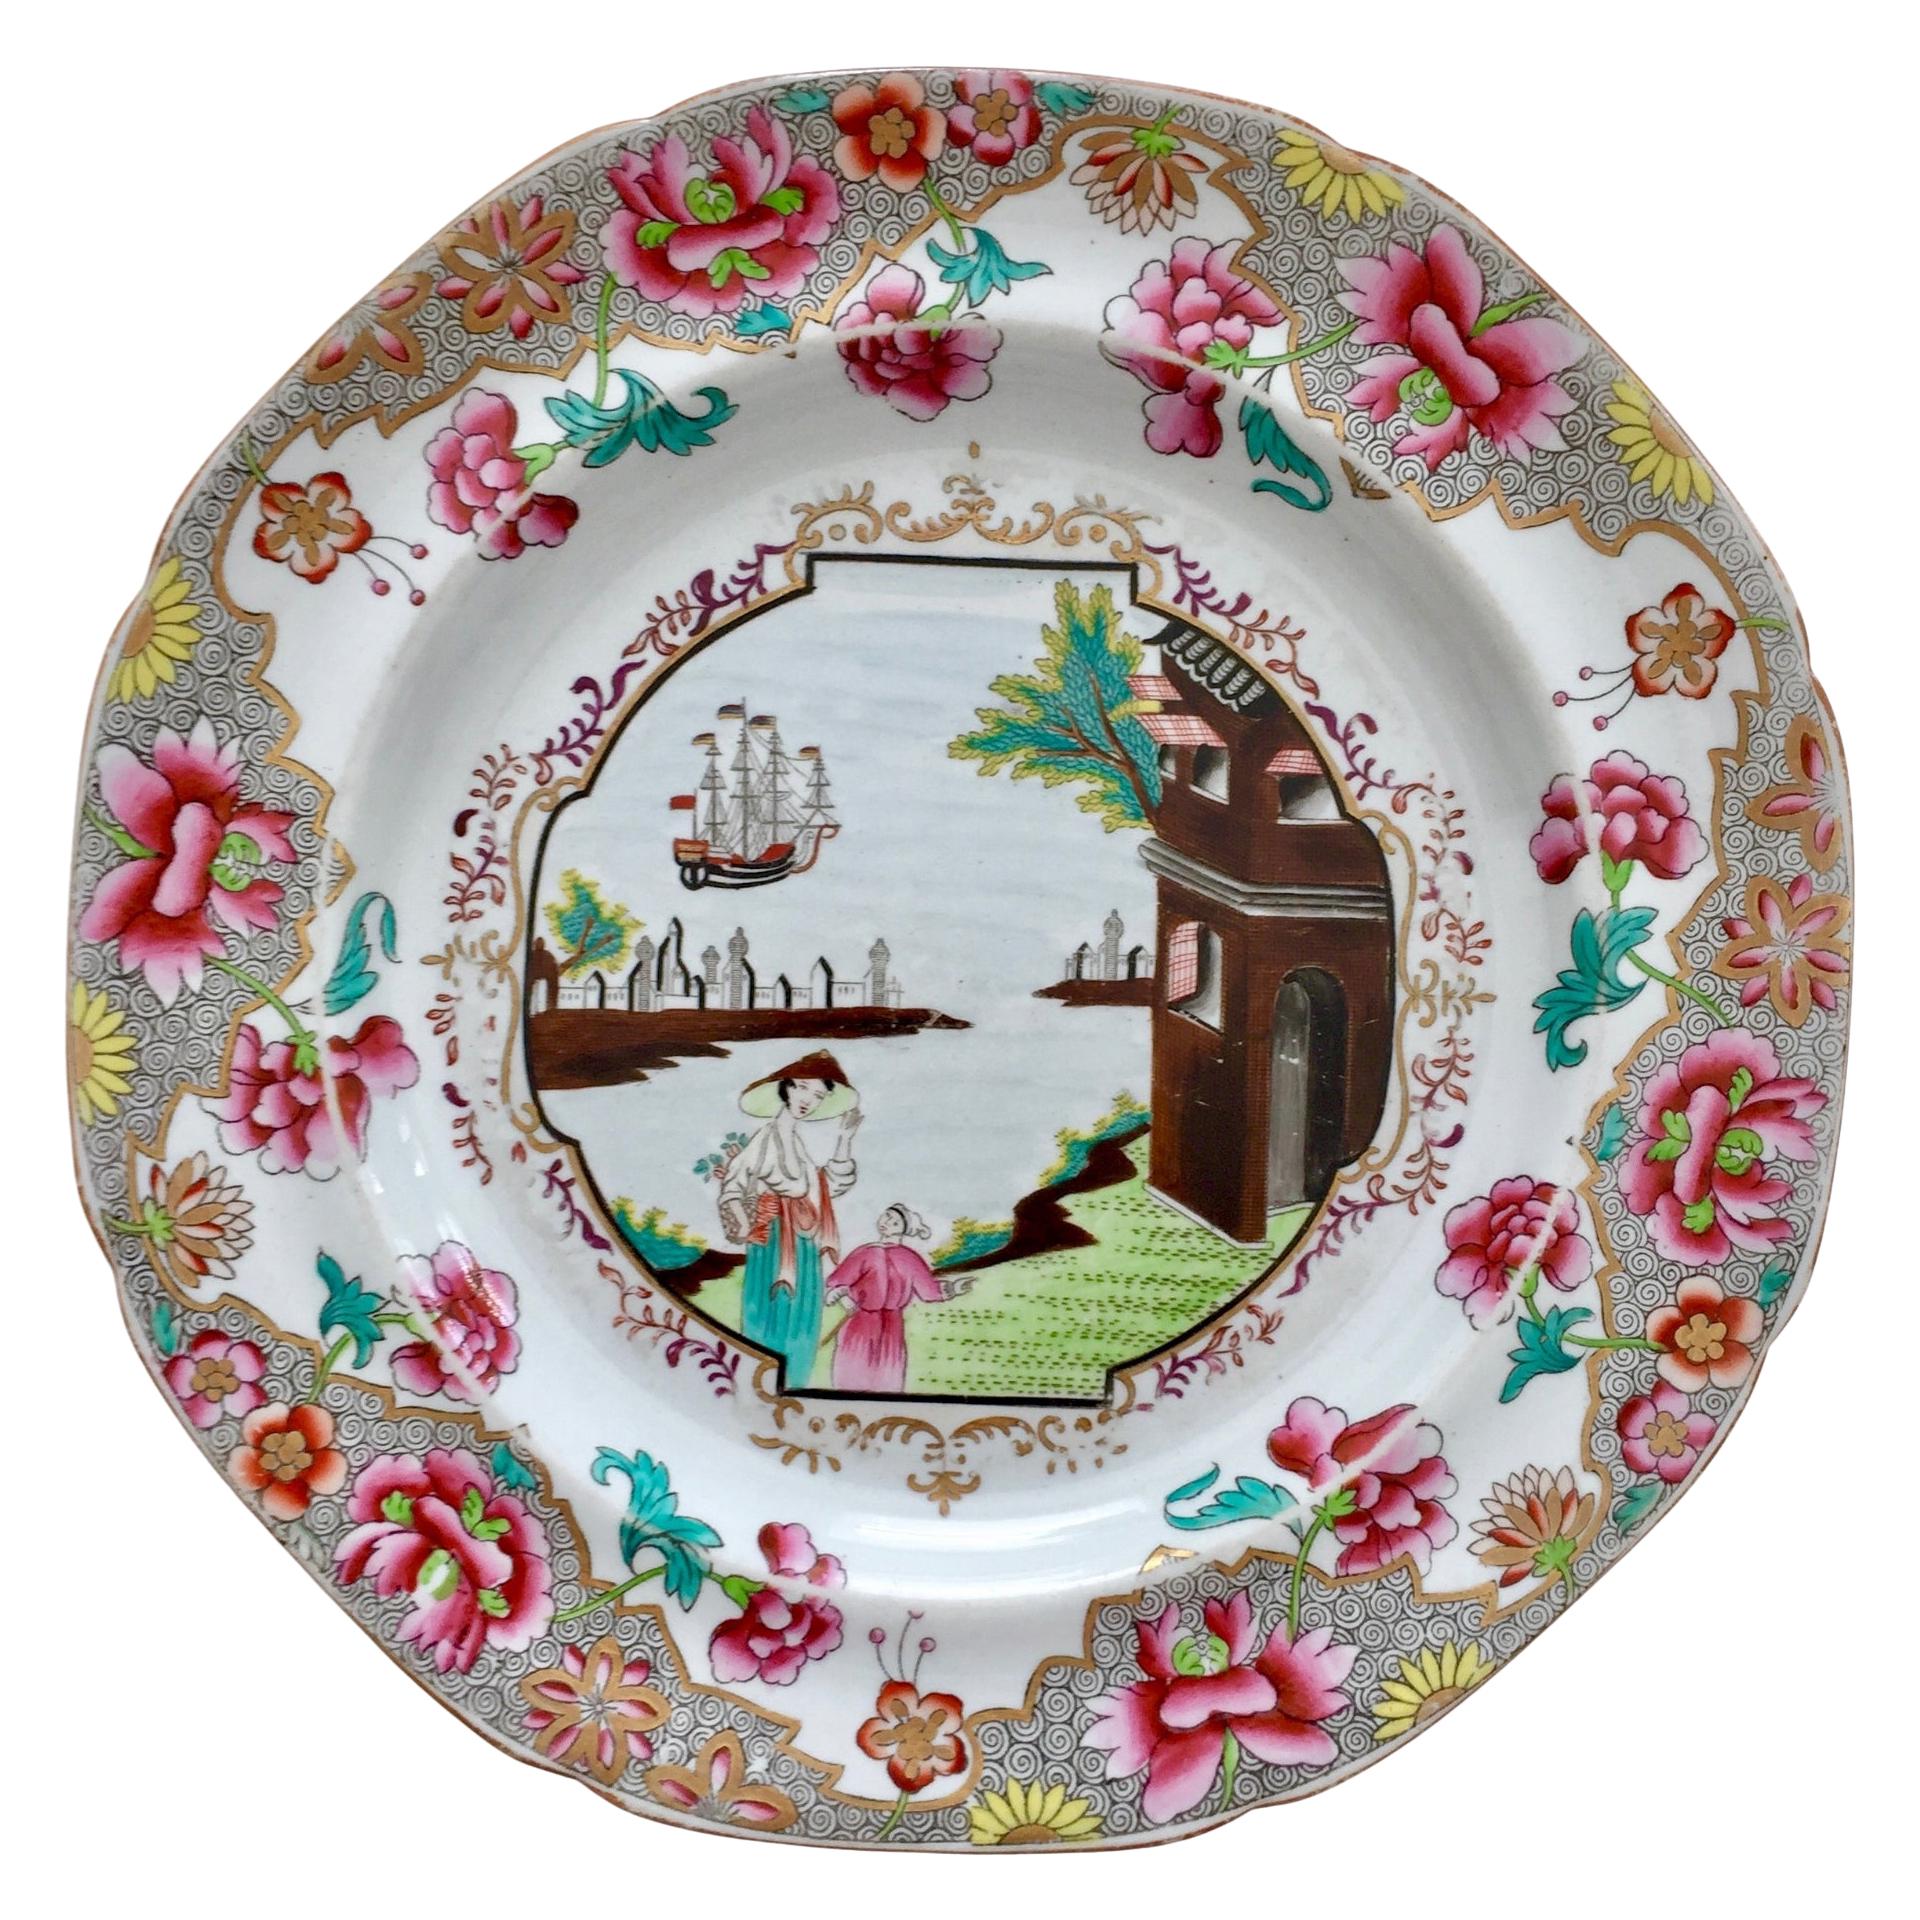 This is a beautiful Spode plate made between 1812 and 1833, which was the Regency era. The plate is made of stone china and is decorated in the chinoiserie style with the very famous and now rare 